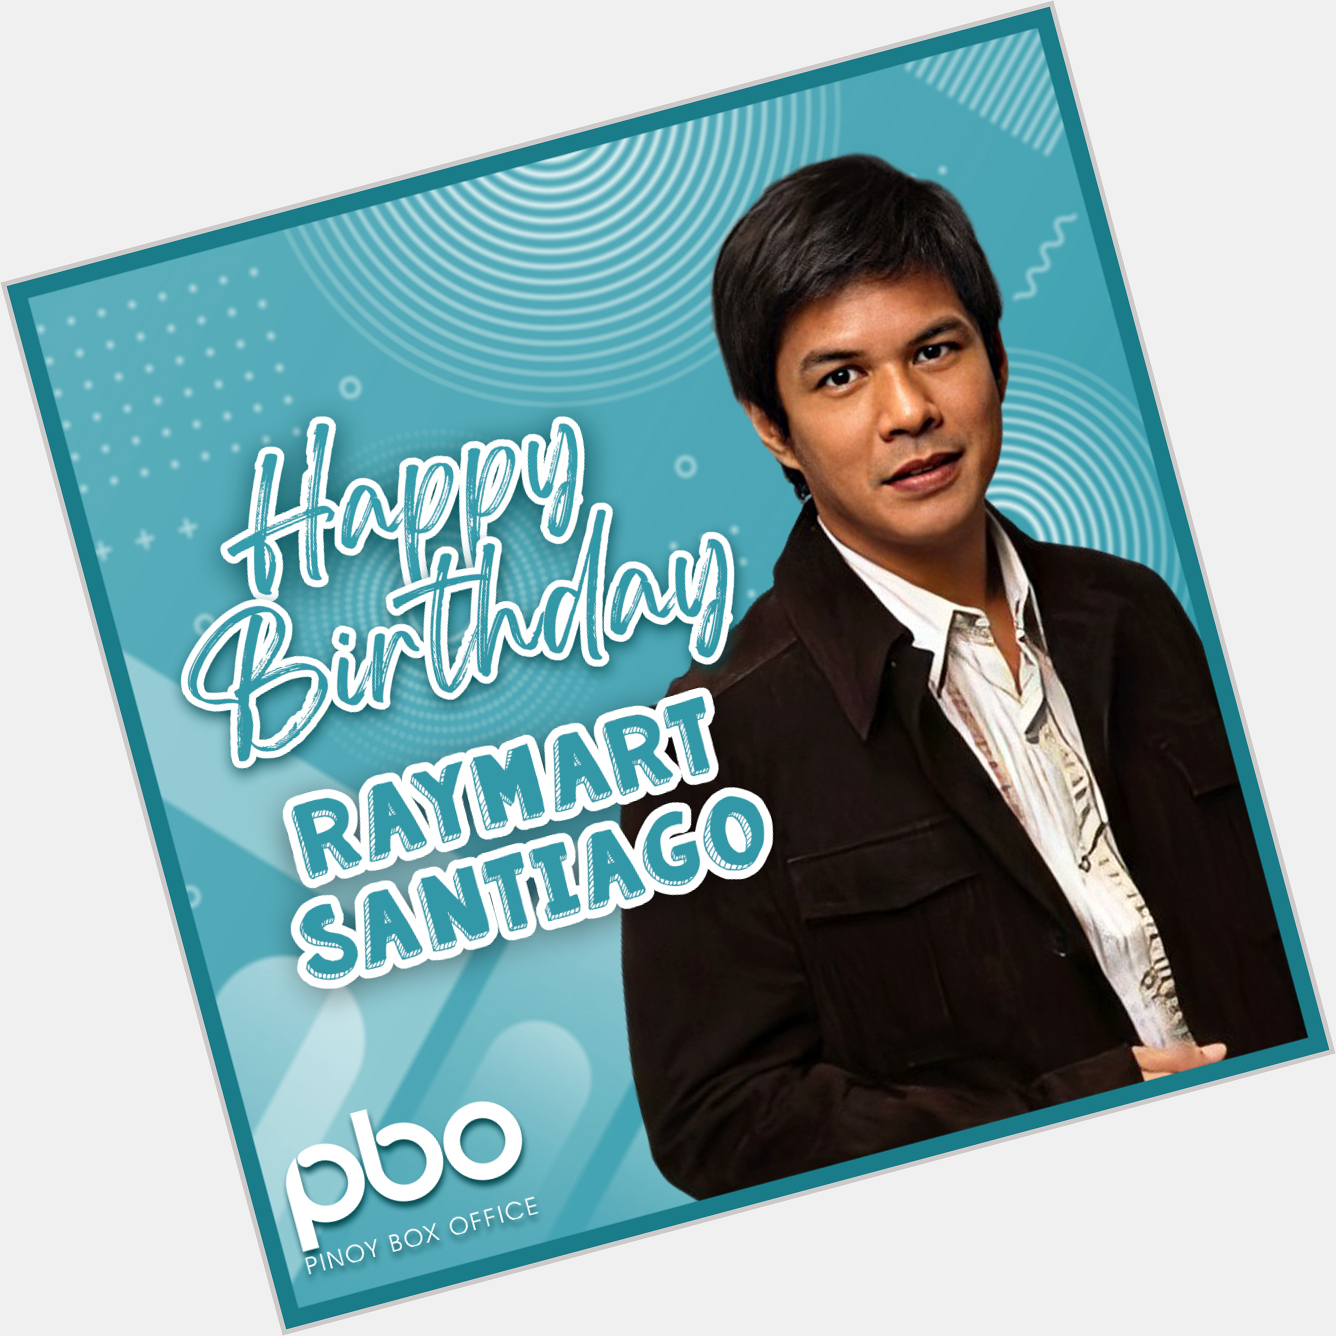 Happy birthday, Raymart Santiago! Wishing you a day filled with happiness and love! 